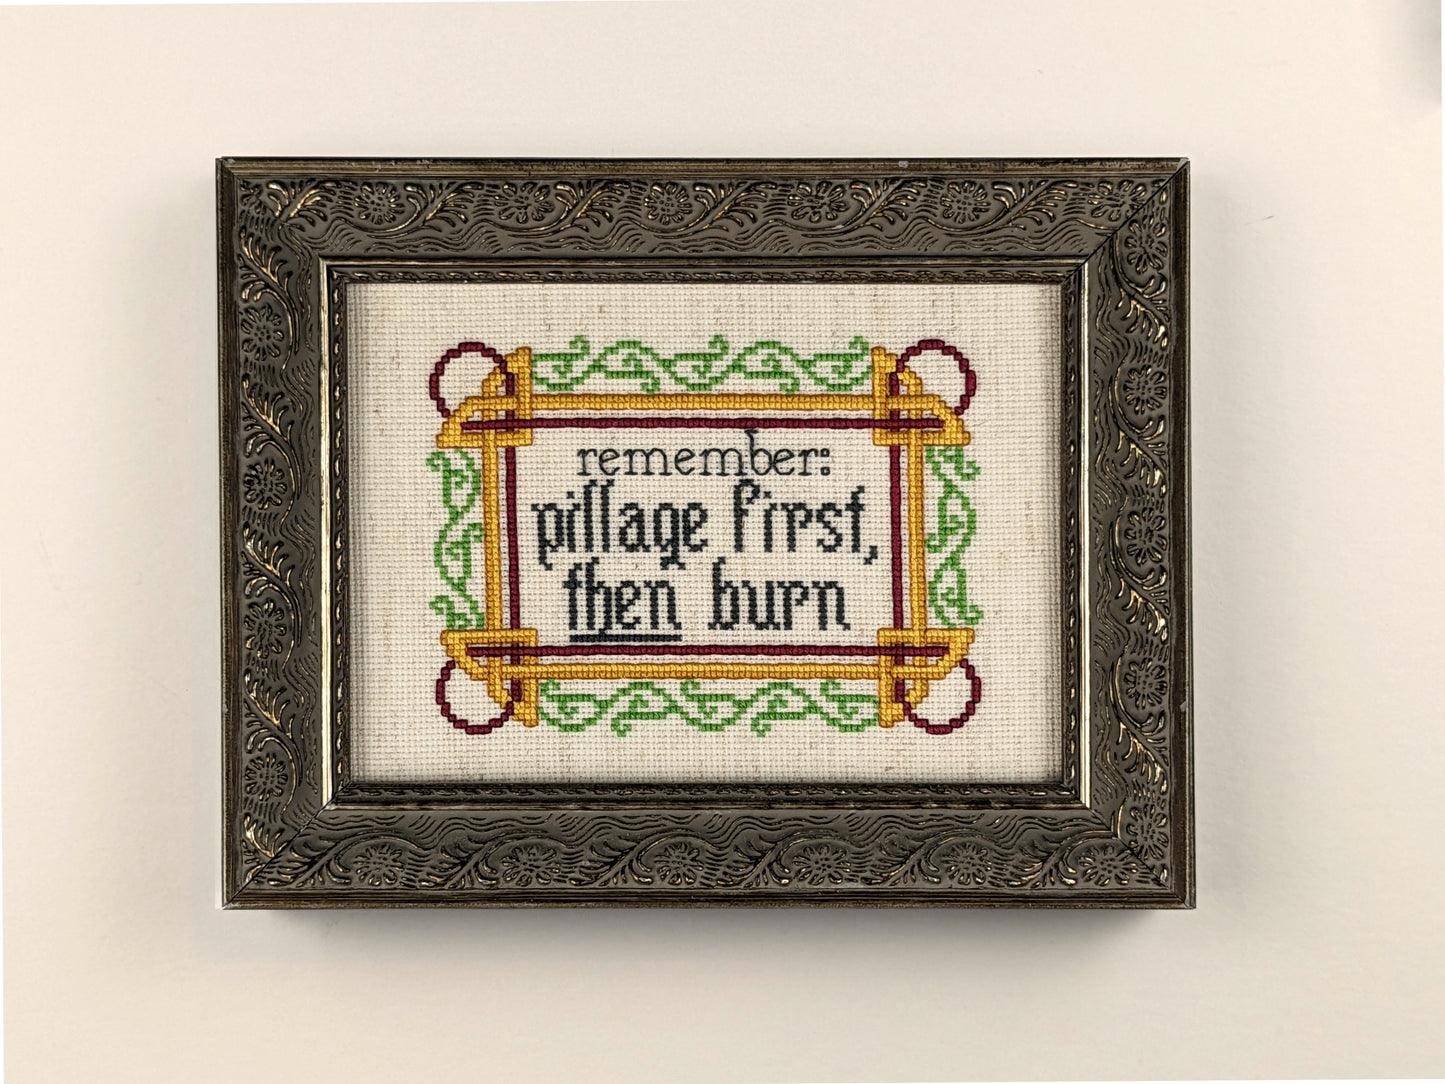 Raider's Creed: "Pillage First, Then Burn" funny subversive cross stitch pattern with Norse/Viking motifs - Instant PDF Download